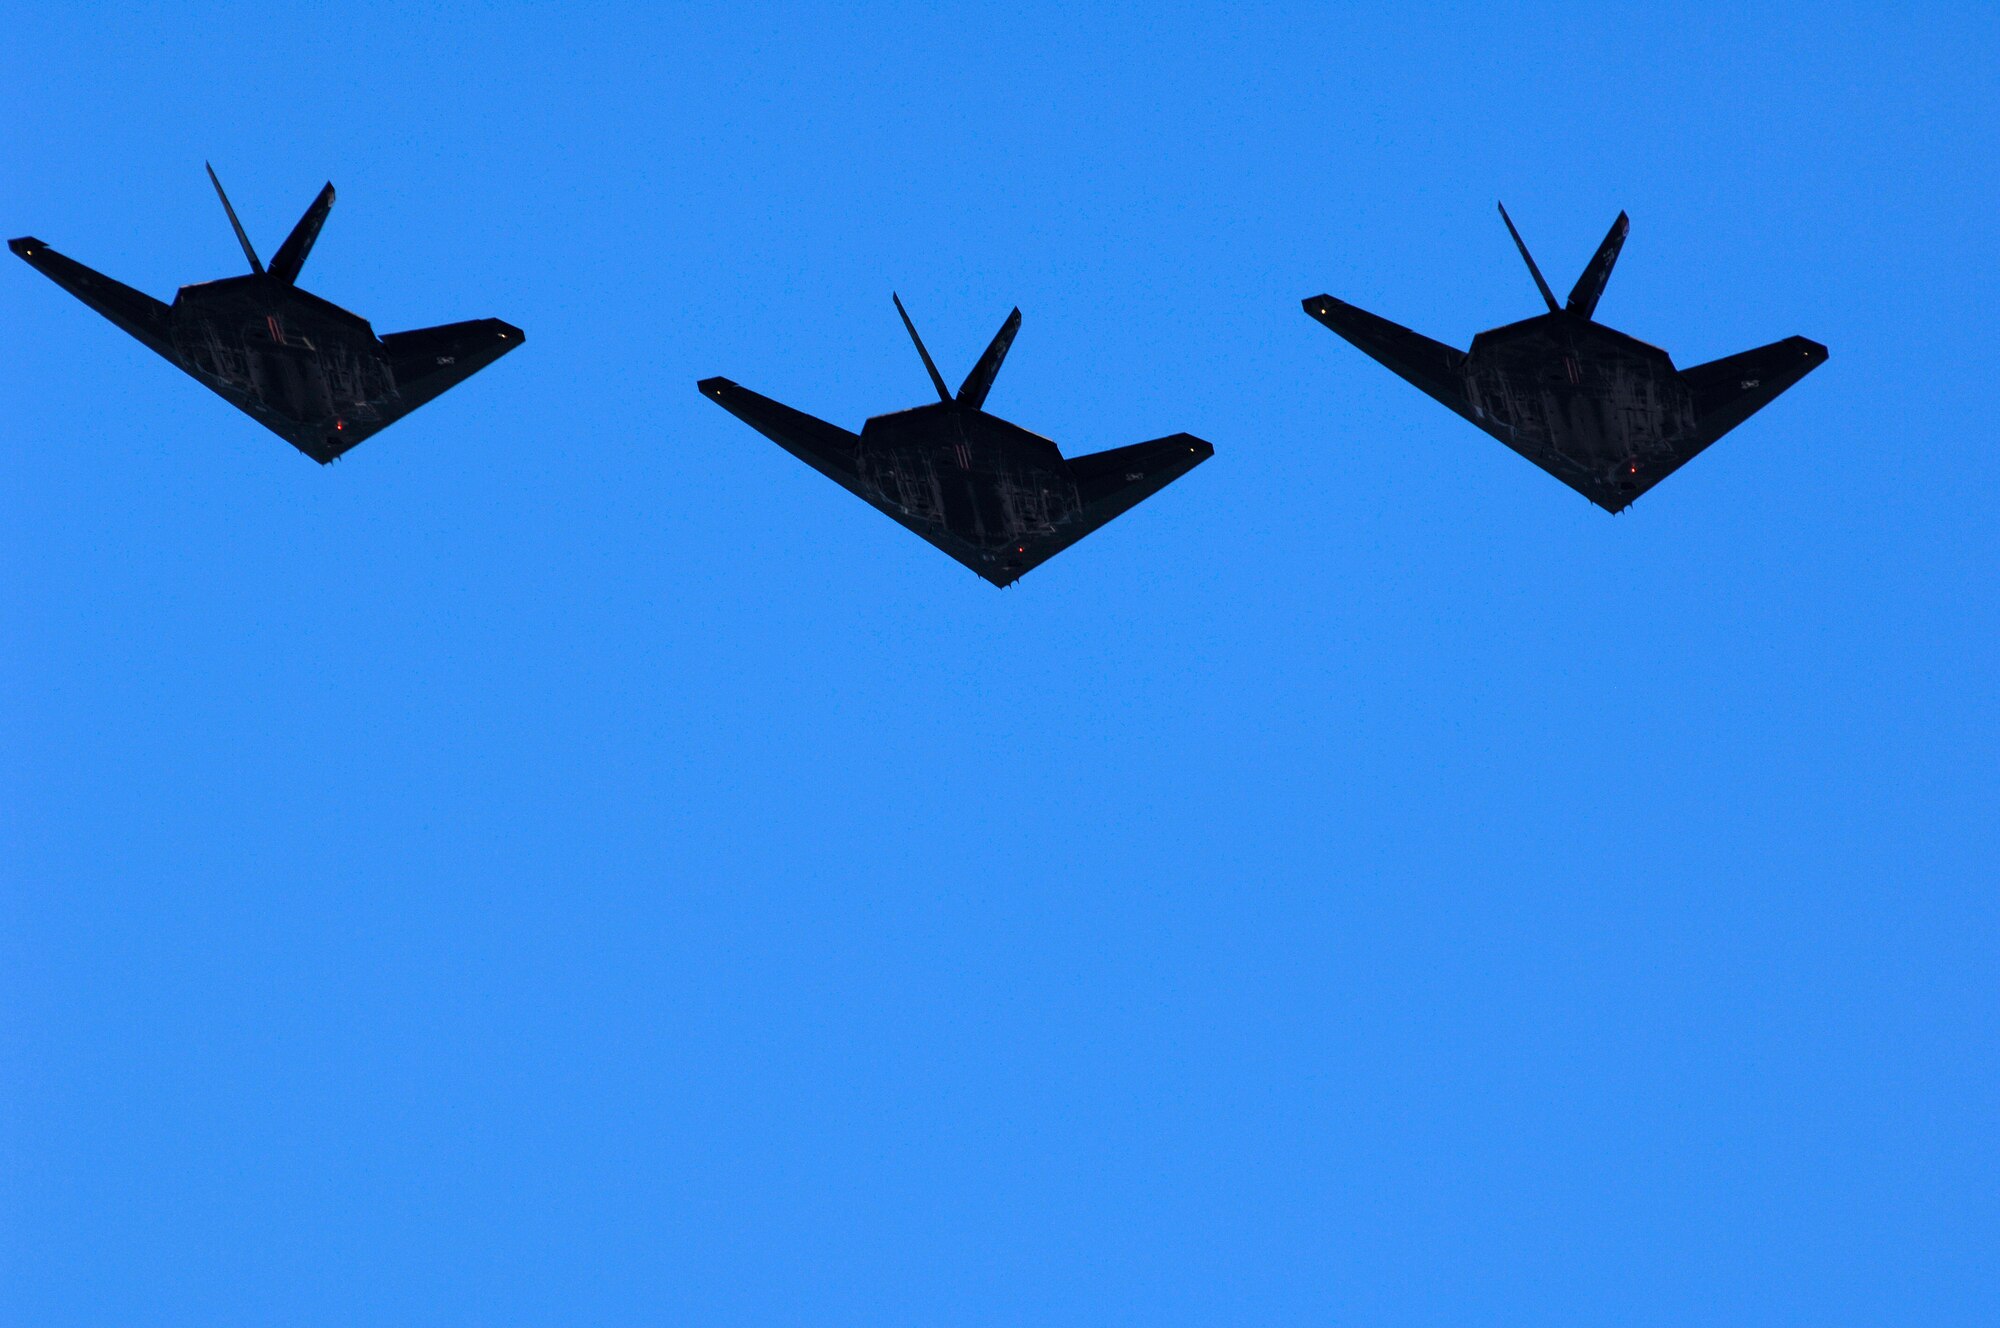 Three of the final four F-117A Nighthawk's fly over Holloman AFB, N.M. during the Sunset Stealth retirement ceremony, 21 April 2008. The F-117A flew under the flag of the 49th Fighter Wing at Holloman Air Force Base, New Mexico from 1992 to its retirement in 2008. (U.S. Air Force Photo by SSgt Jason Colbert)